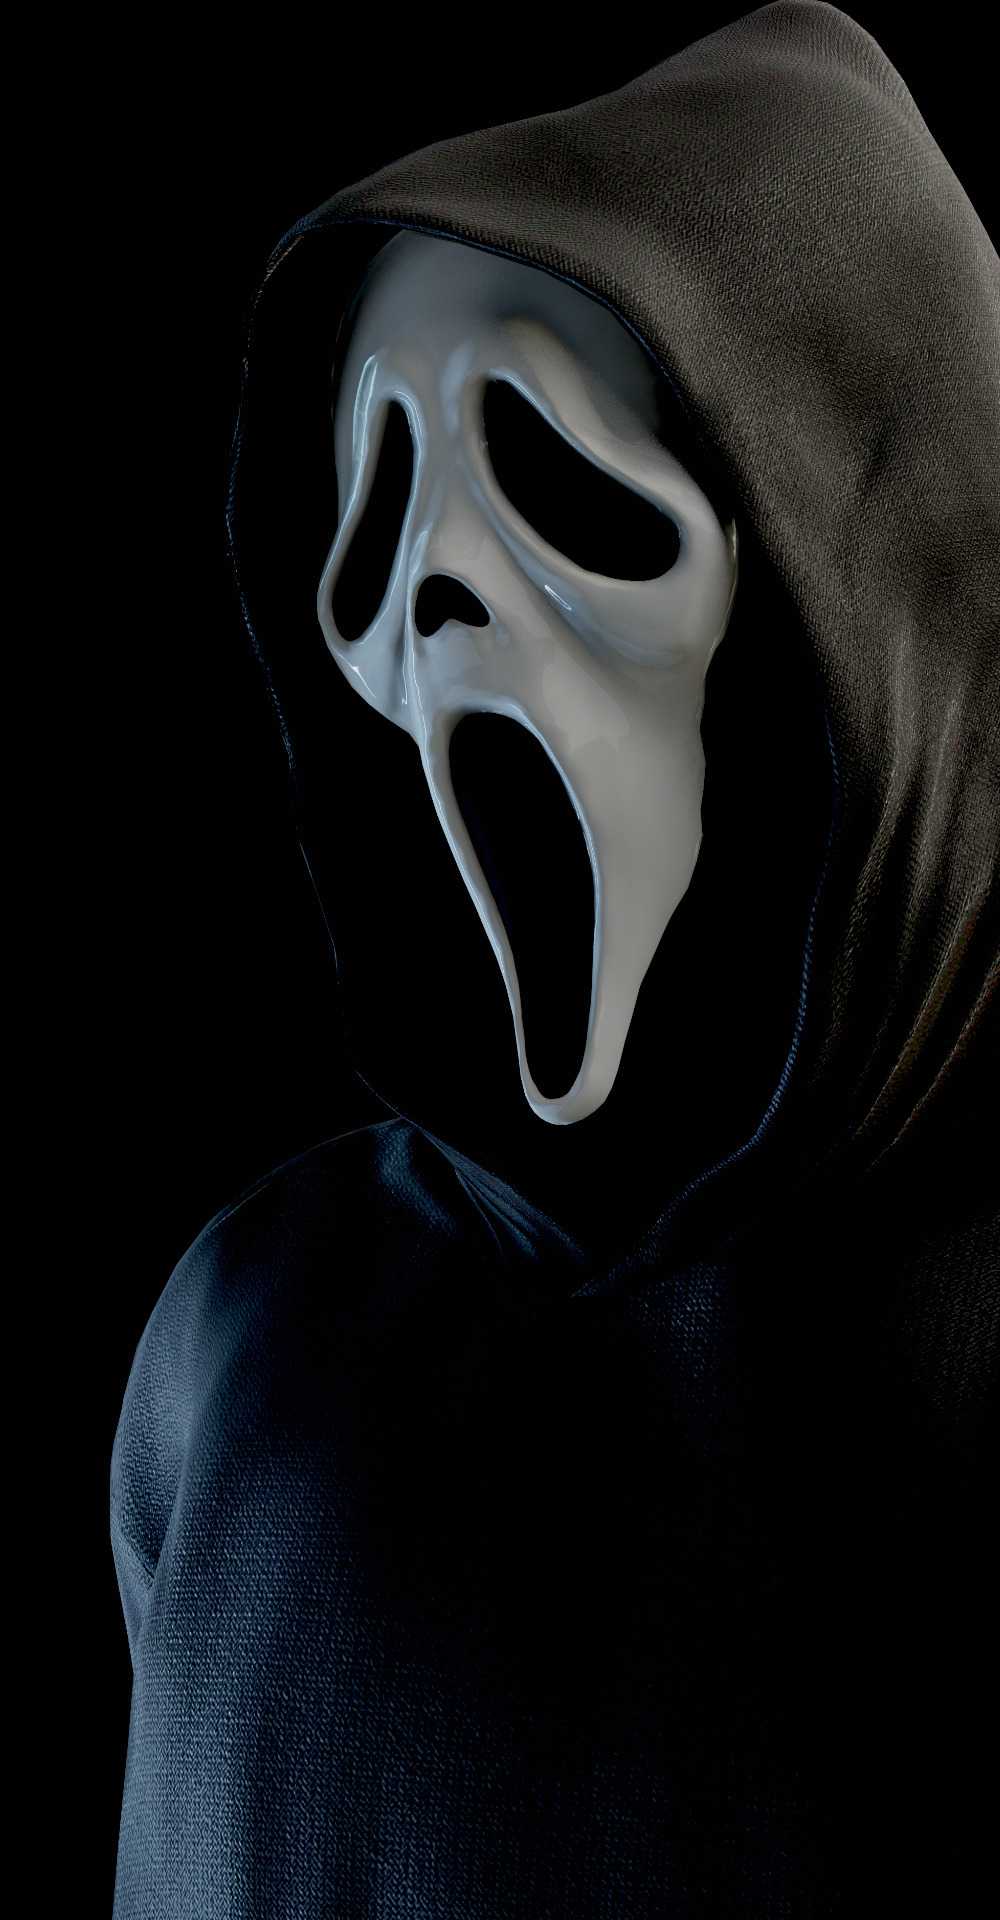 Ghostface   Scary wallpaper Graphic poster art Ghost face wallpaper  aesthetic